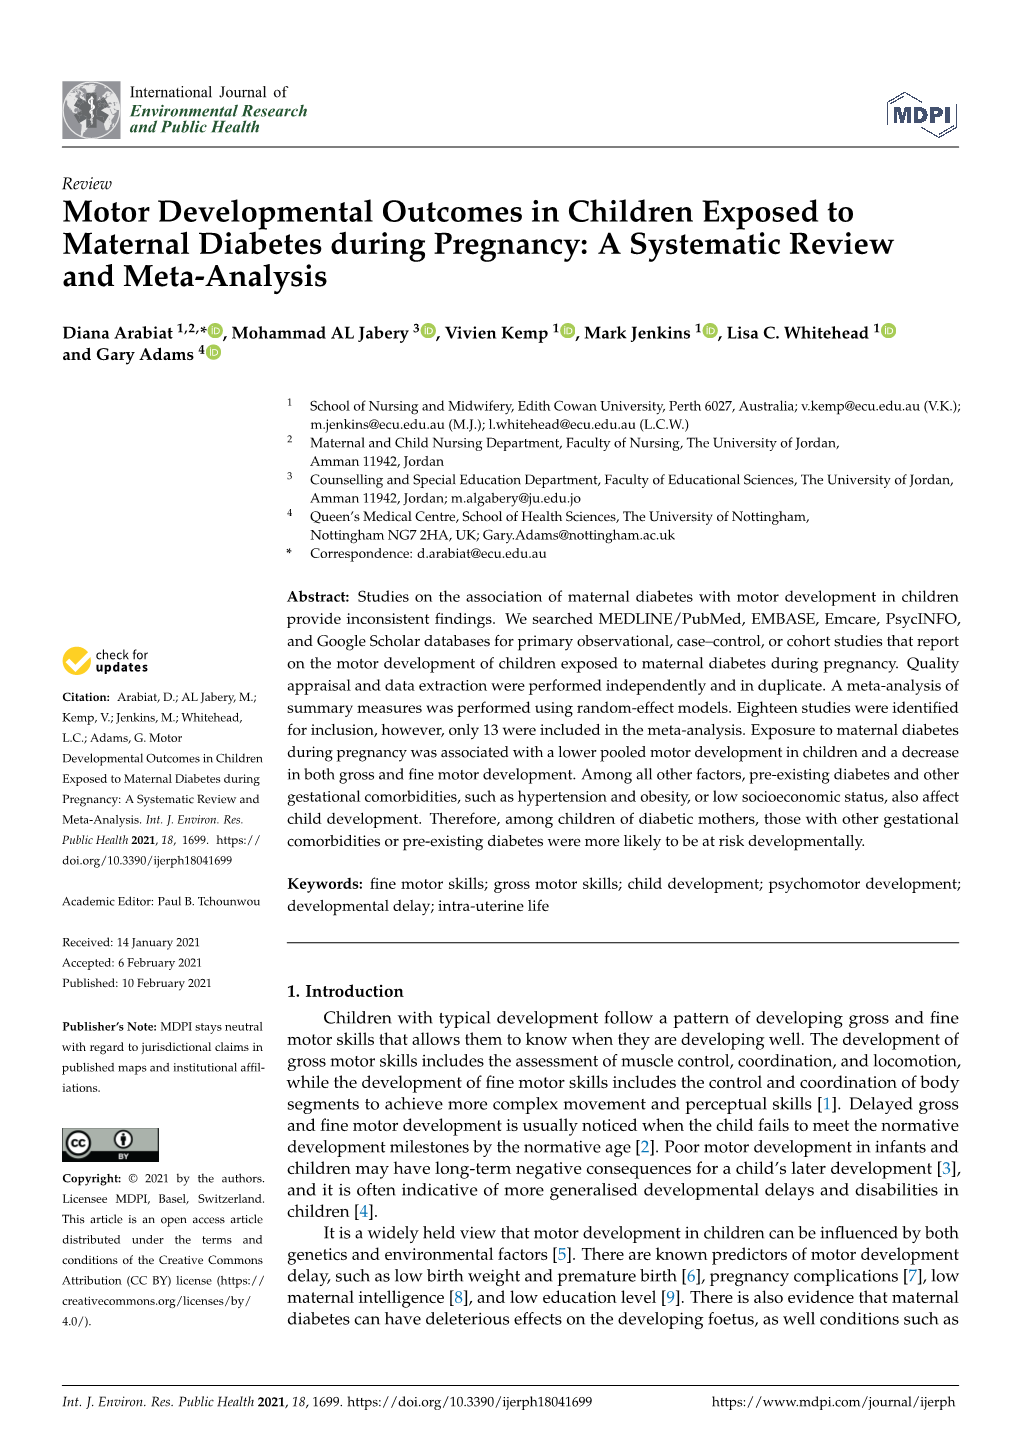 Motor Developmental Outcomes in Children Exposed to Maternal Diabetes During Pregnancy: a Systematic Review and Meta-Analysis